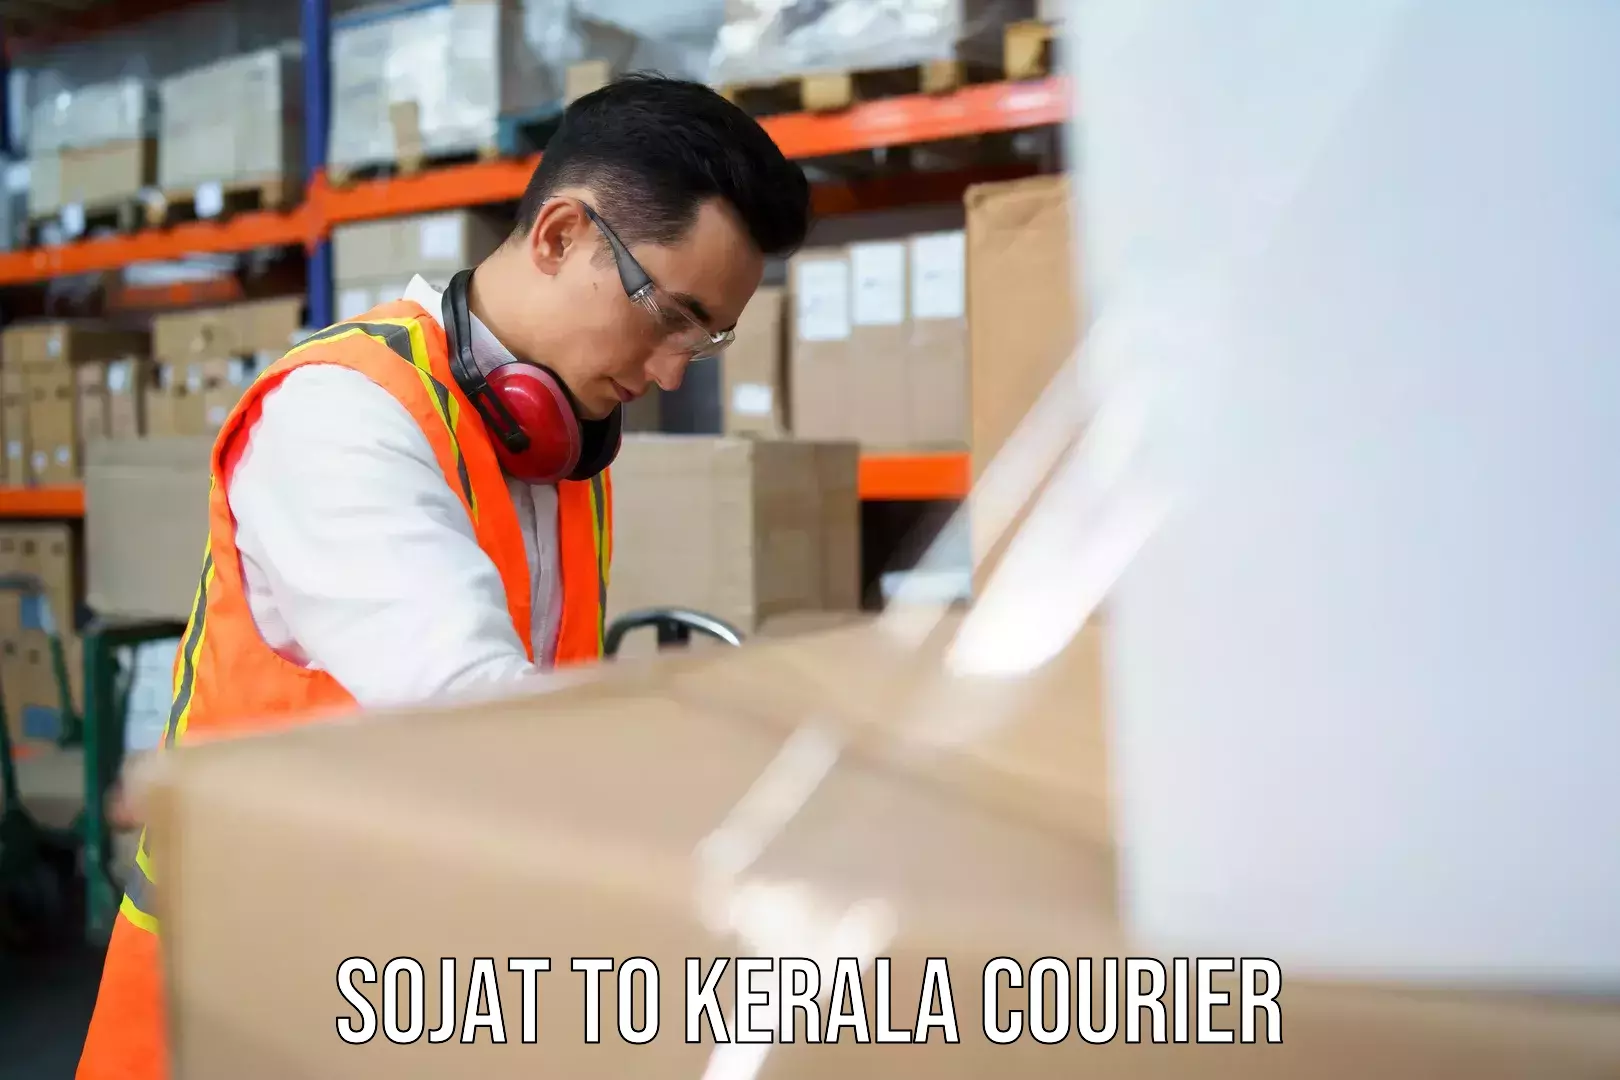 24/7 courier service Sojat to Kerala